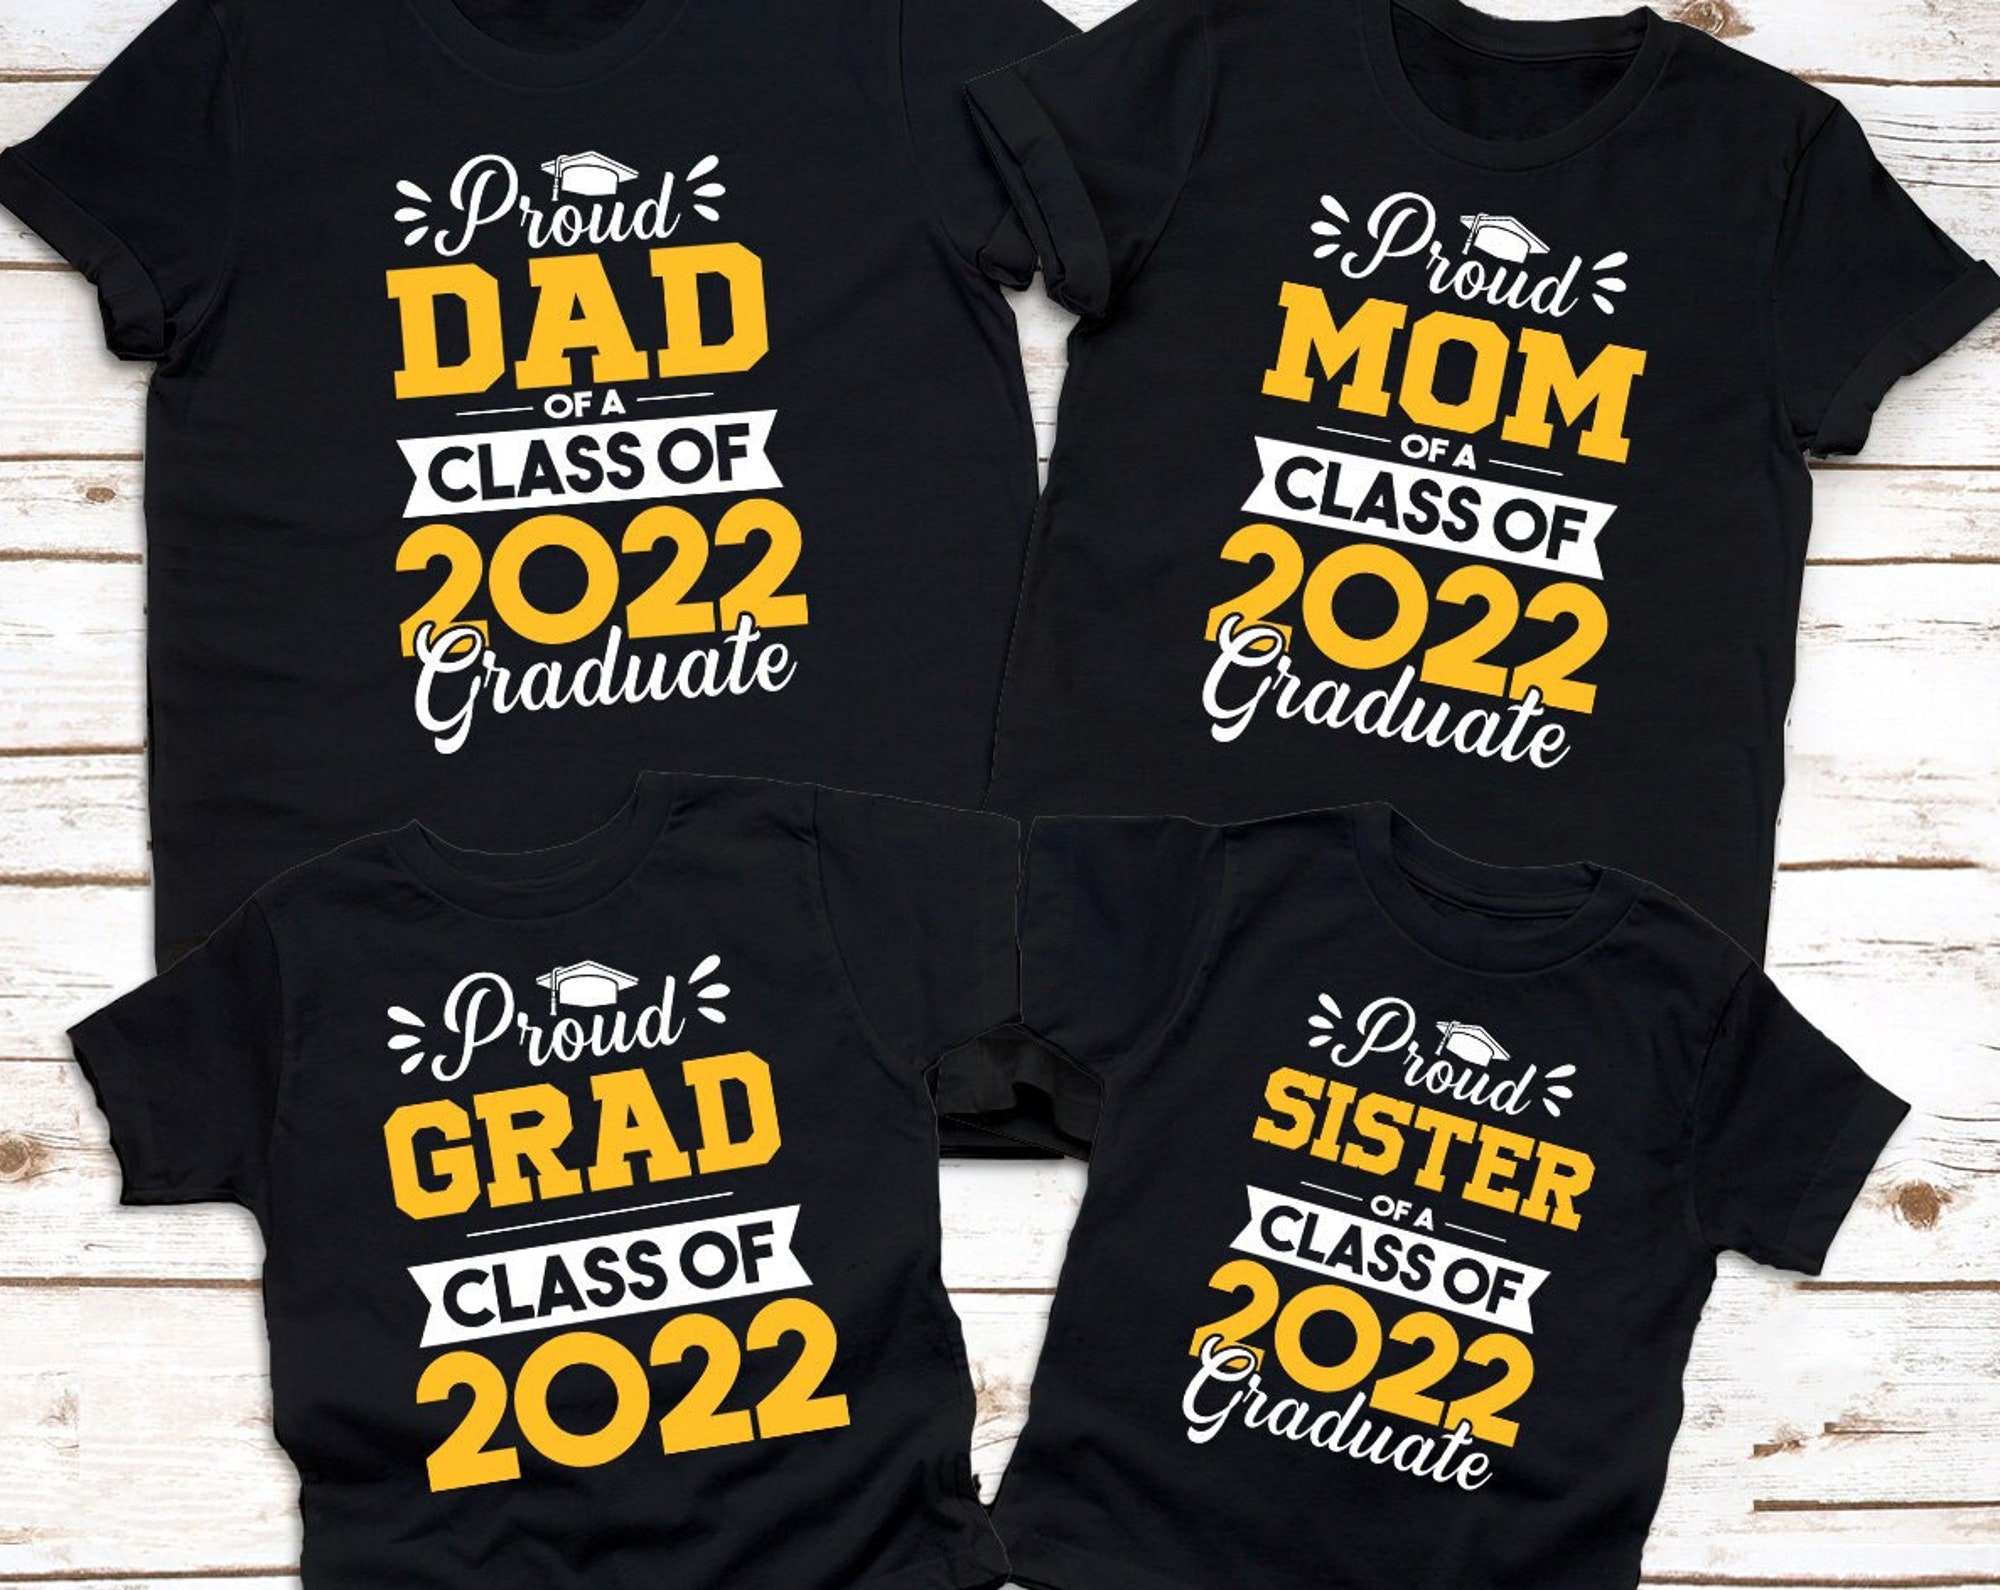 Discover Graduation Family Shirts, Proud Mom of the Graduate shirt, Personalized Graduation Family Shirts, Graduation Gift Shirt, Proud Grad Shirt